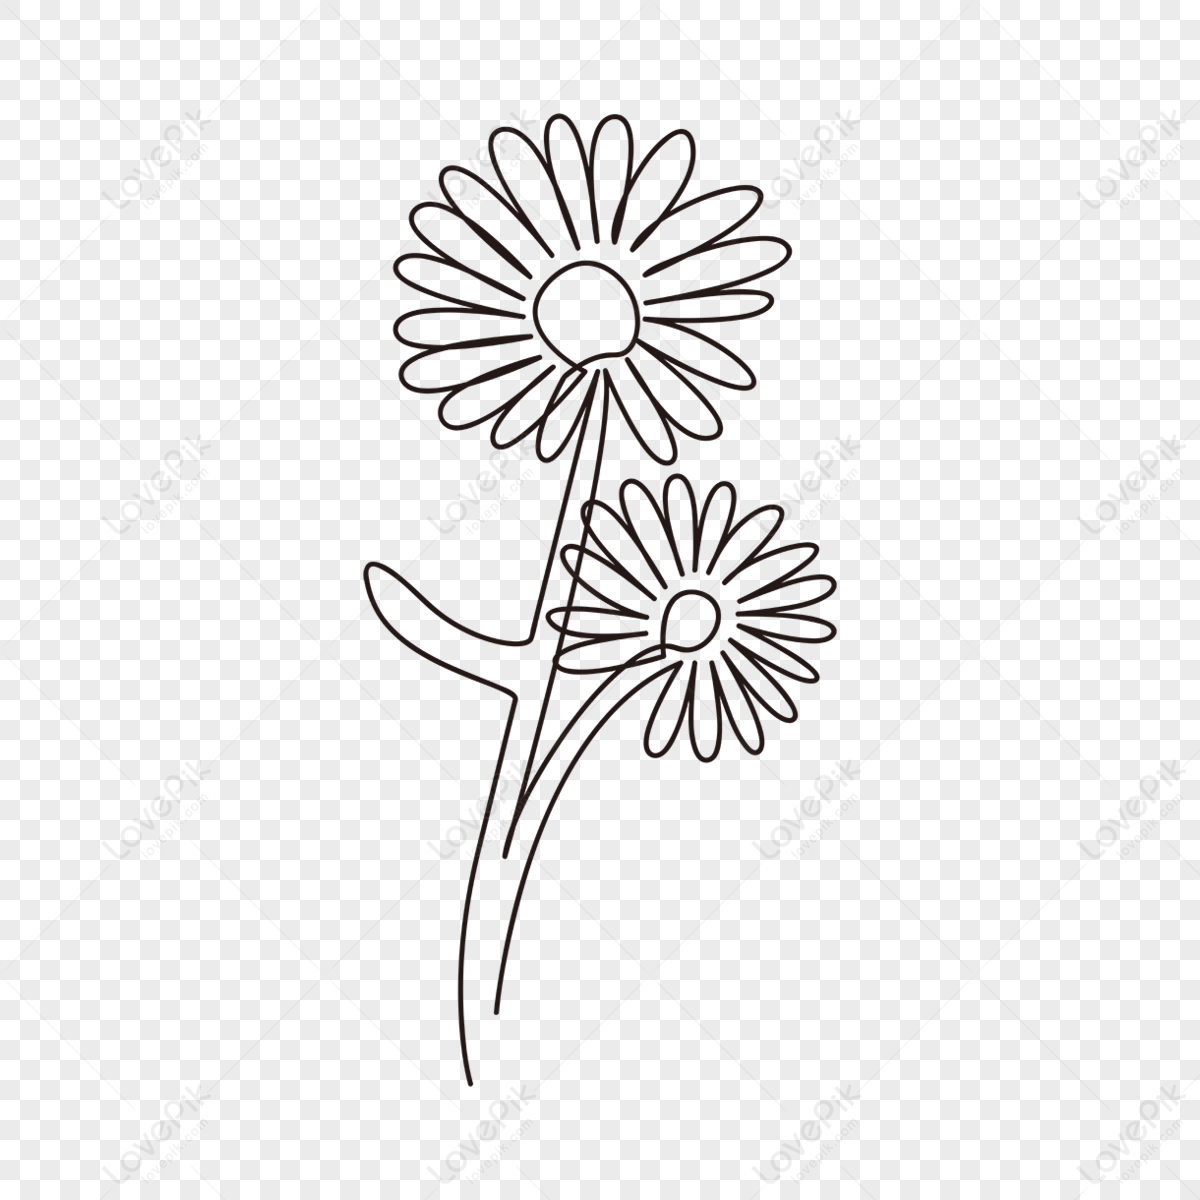 Sun Flower Drawing PNG Images With Transparent Background | Free ...